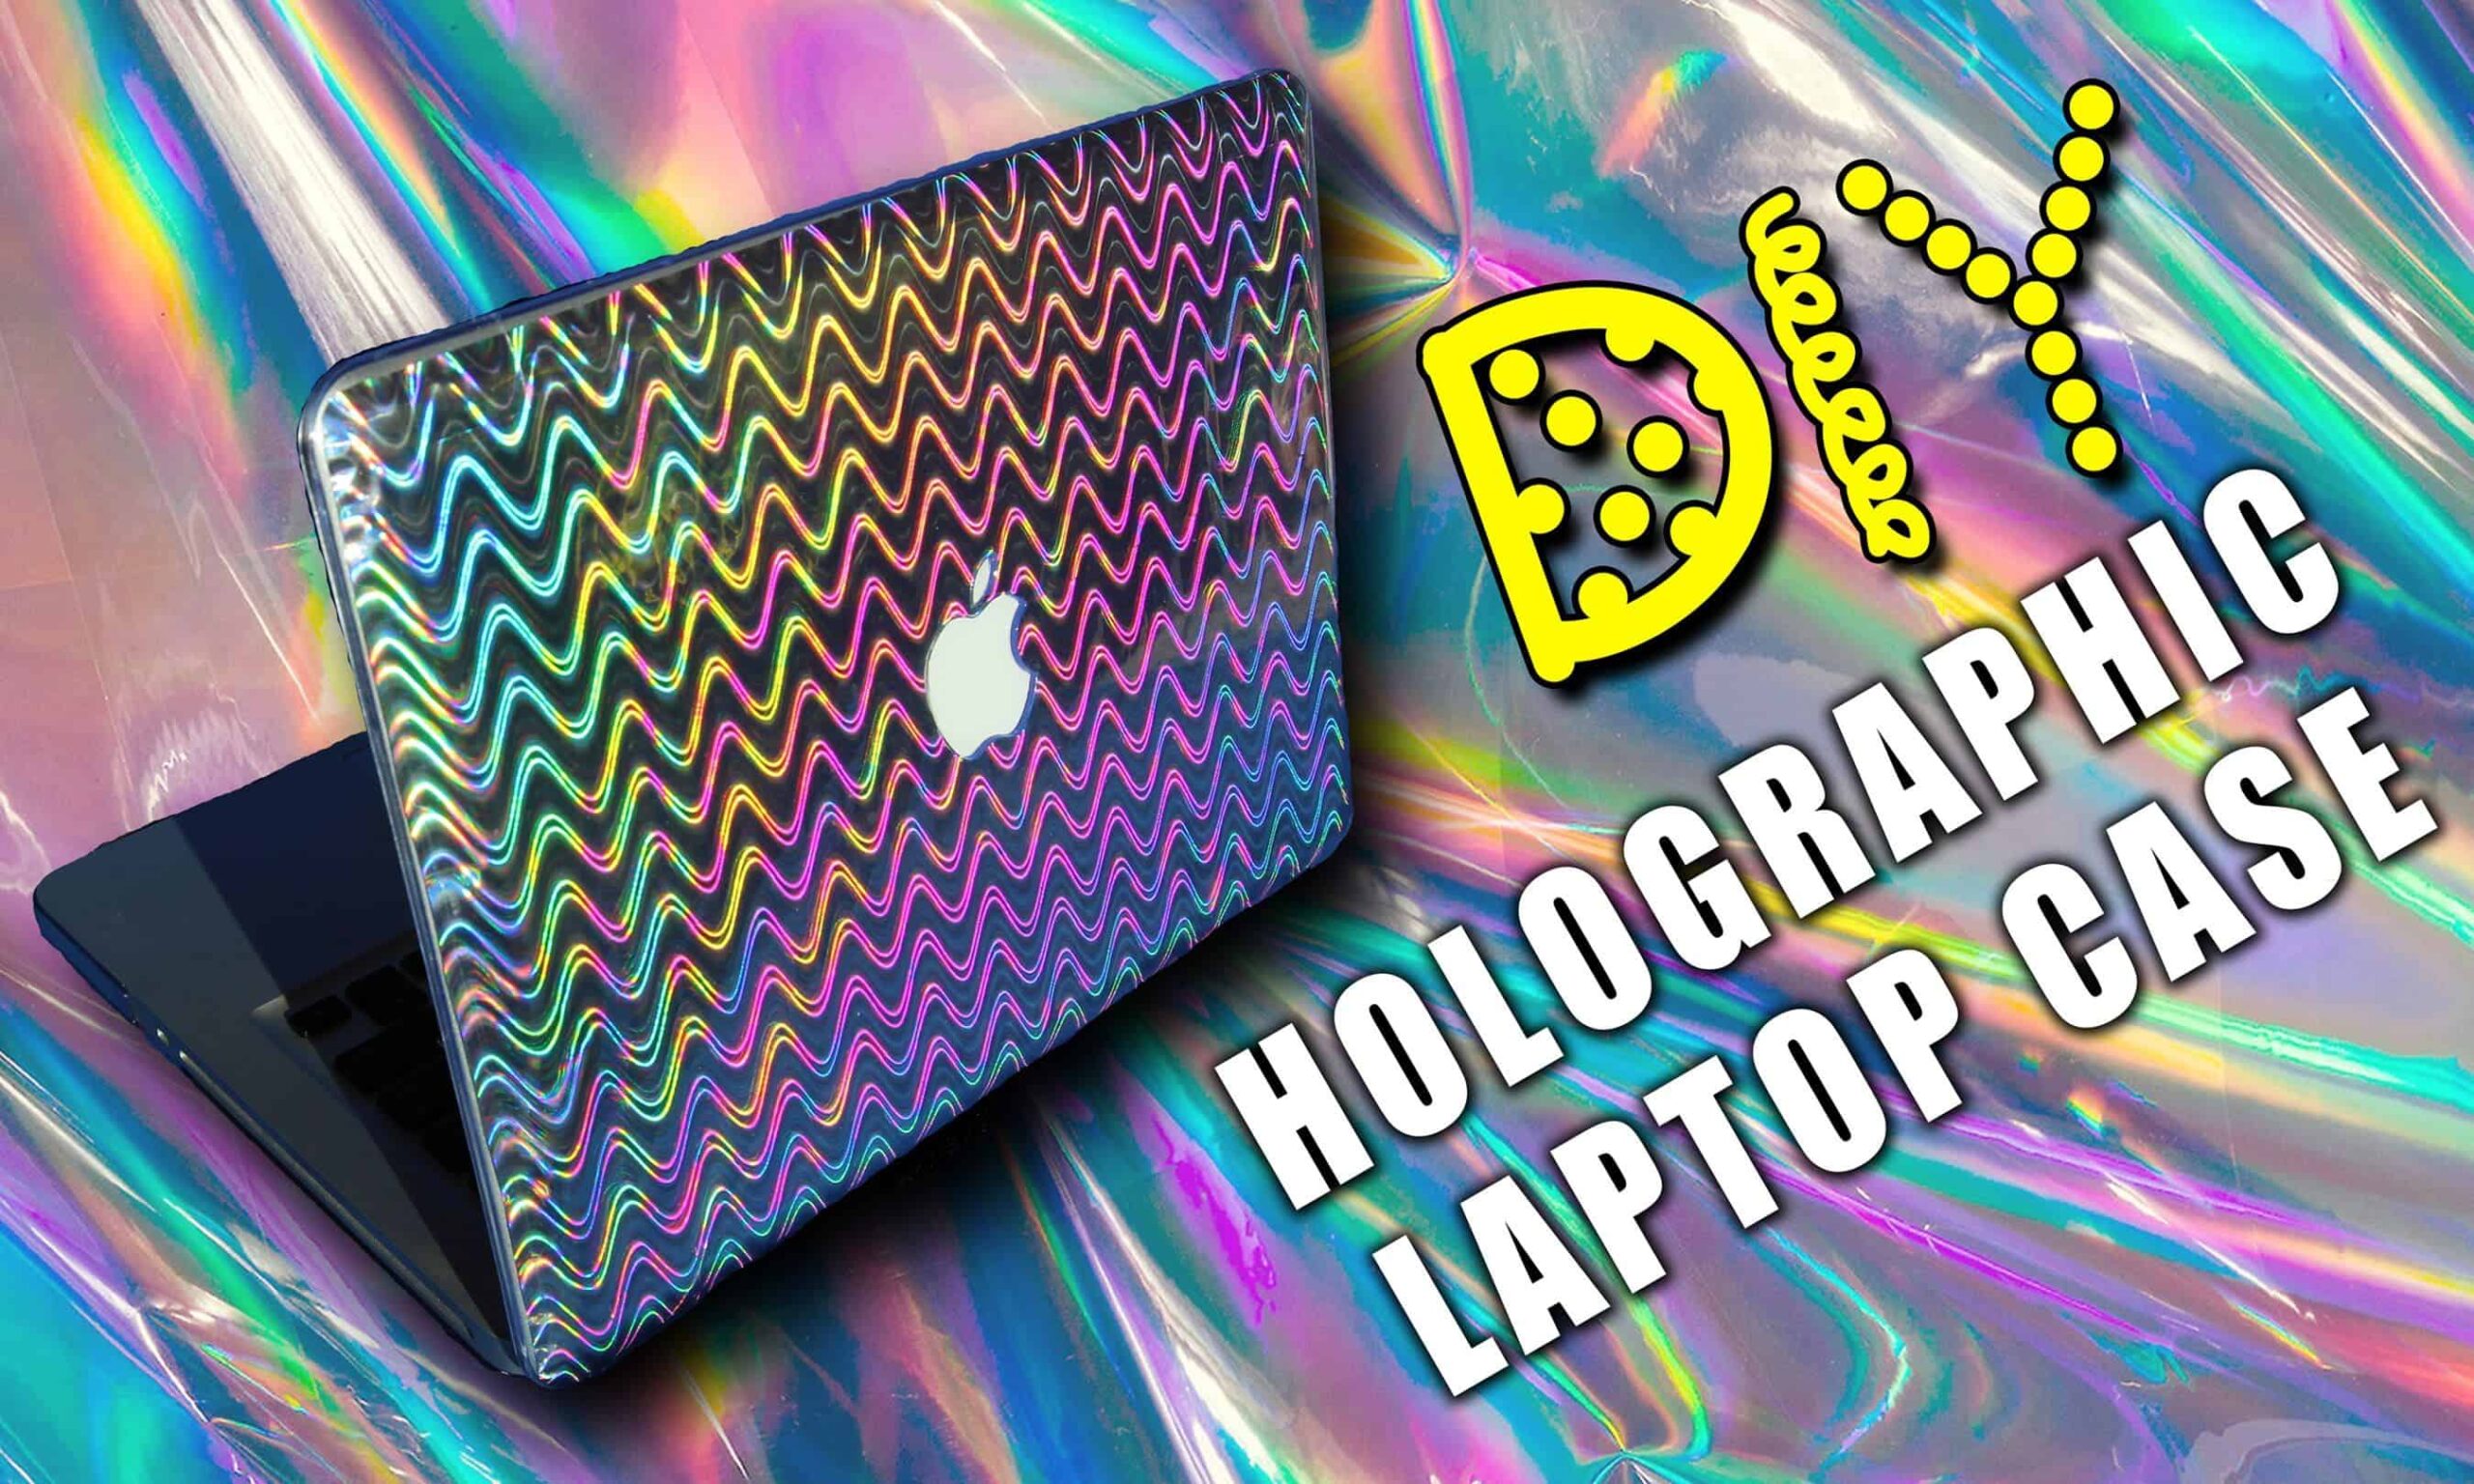 15 great DIY holographic projects